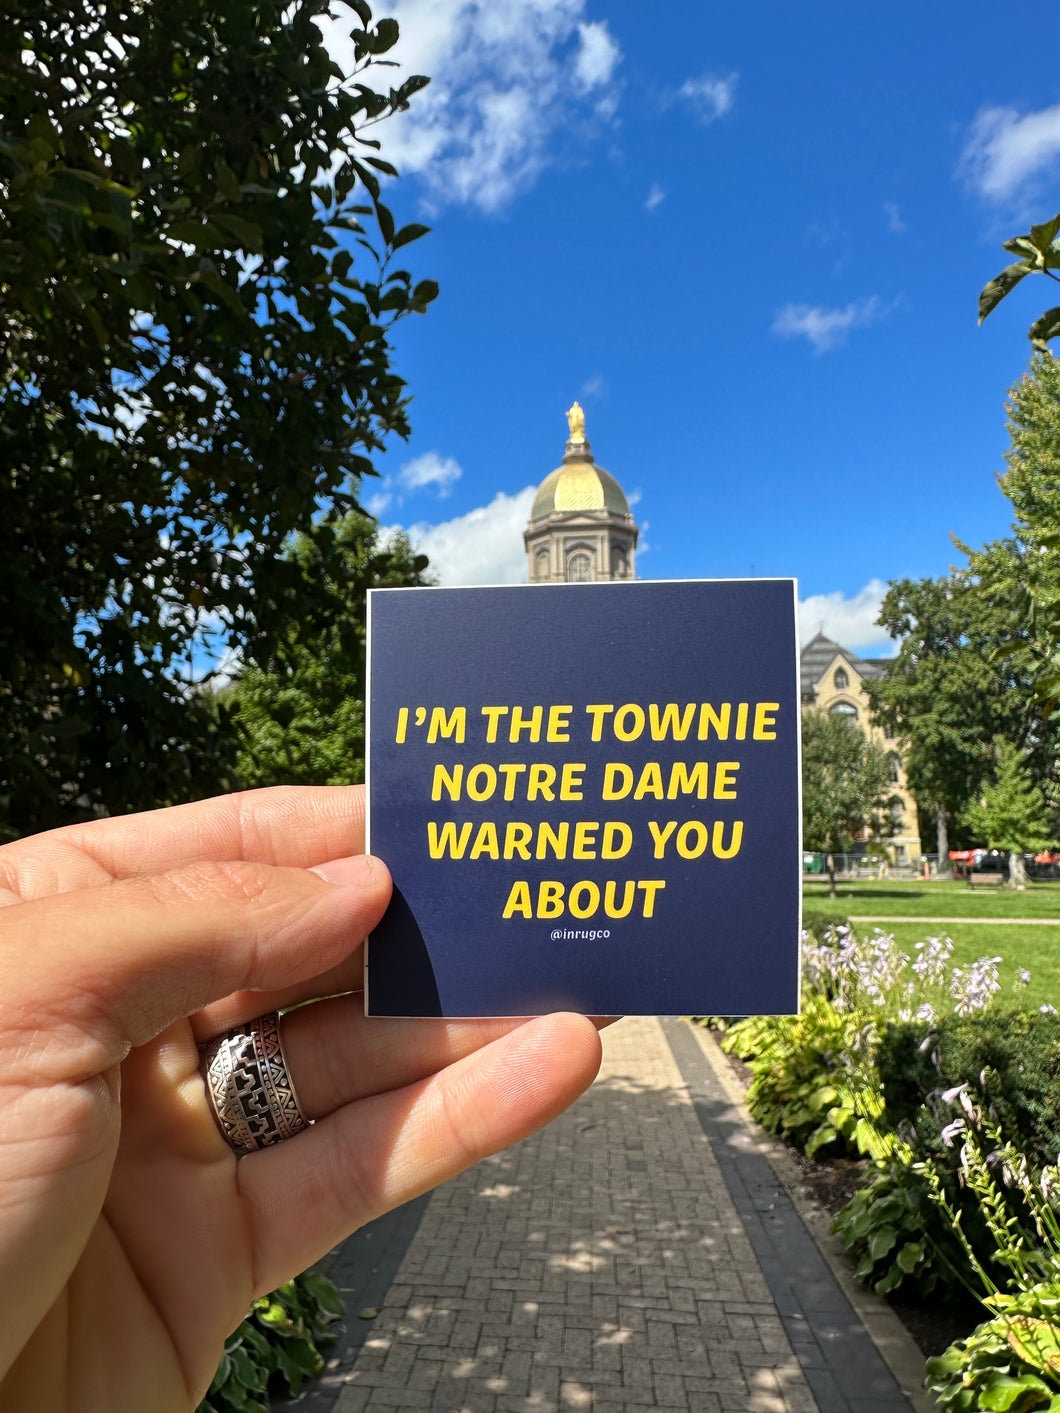 I'm the townie Notre dame warned you about sticker